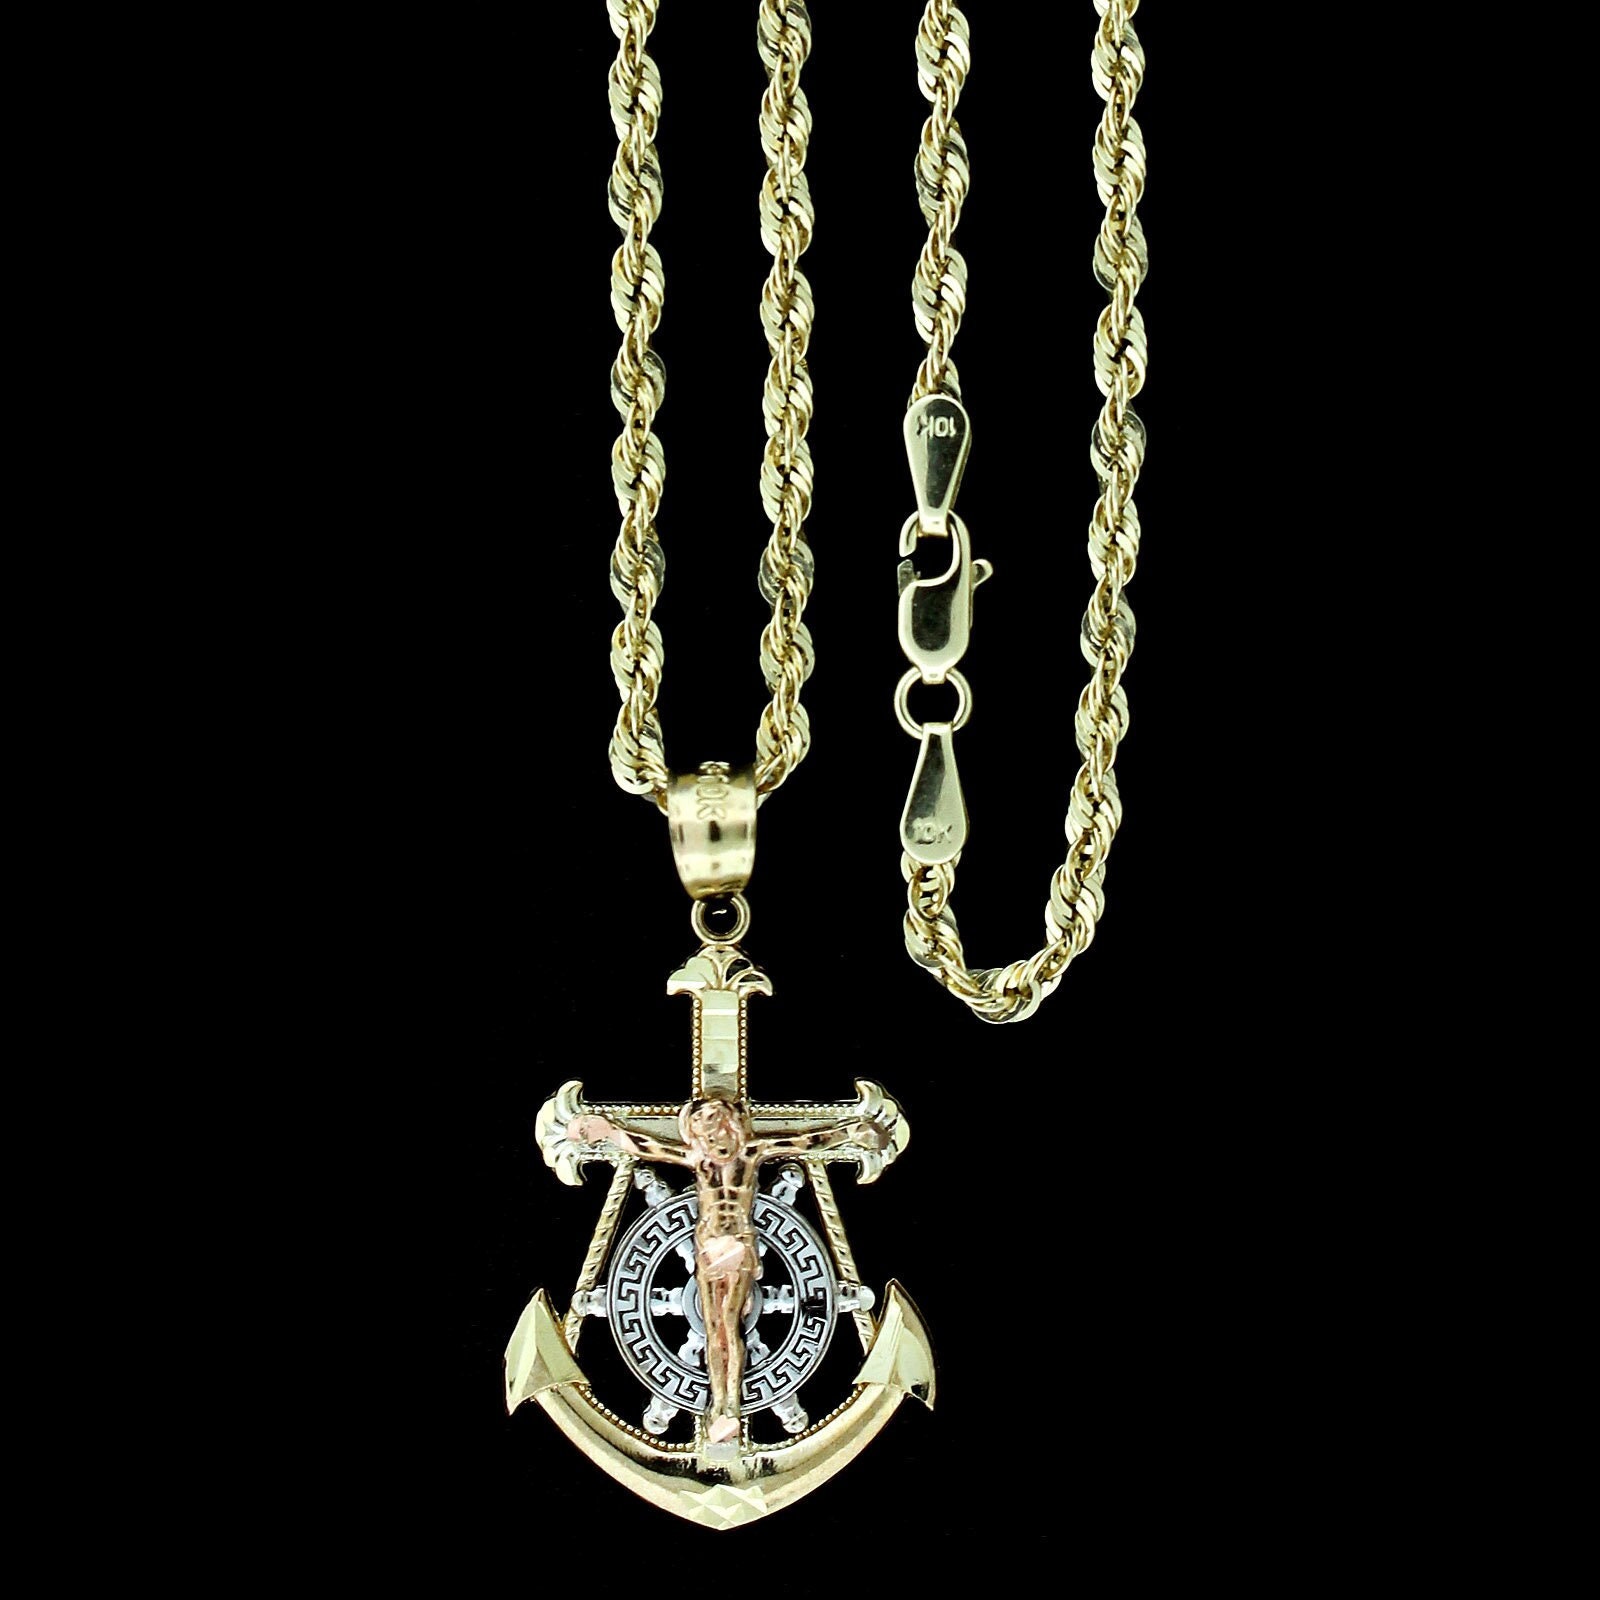 Extra Large Heavy Men's 925 Sterling Silver Nautical Boat Anchor Pendant Necklace, 50mm 22in 3.6mm Rope